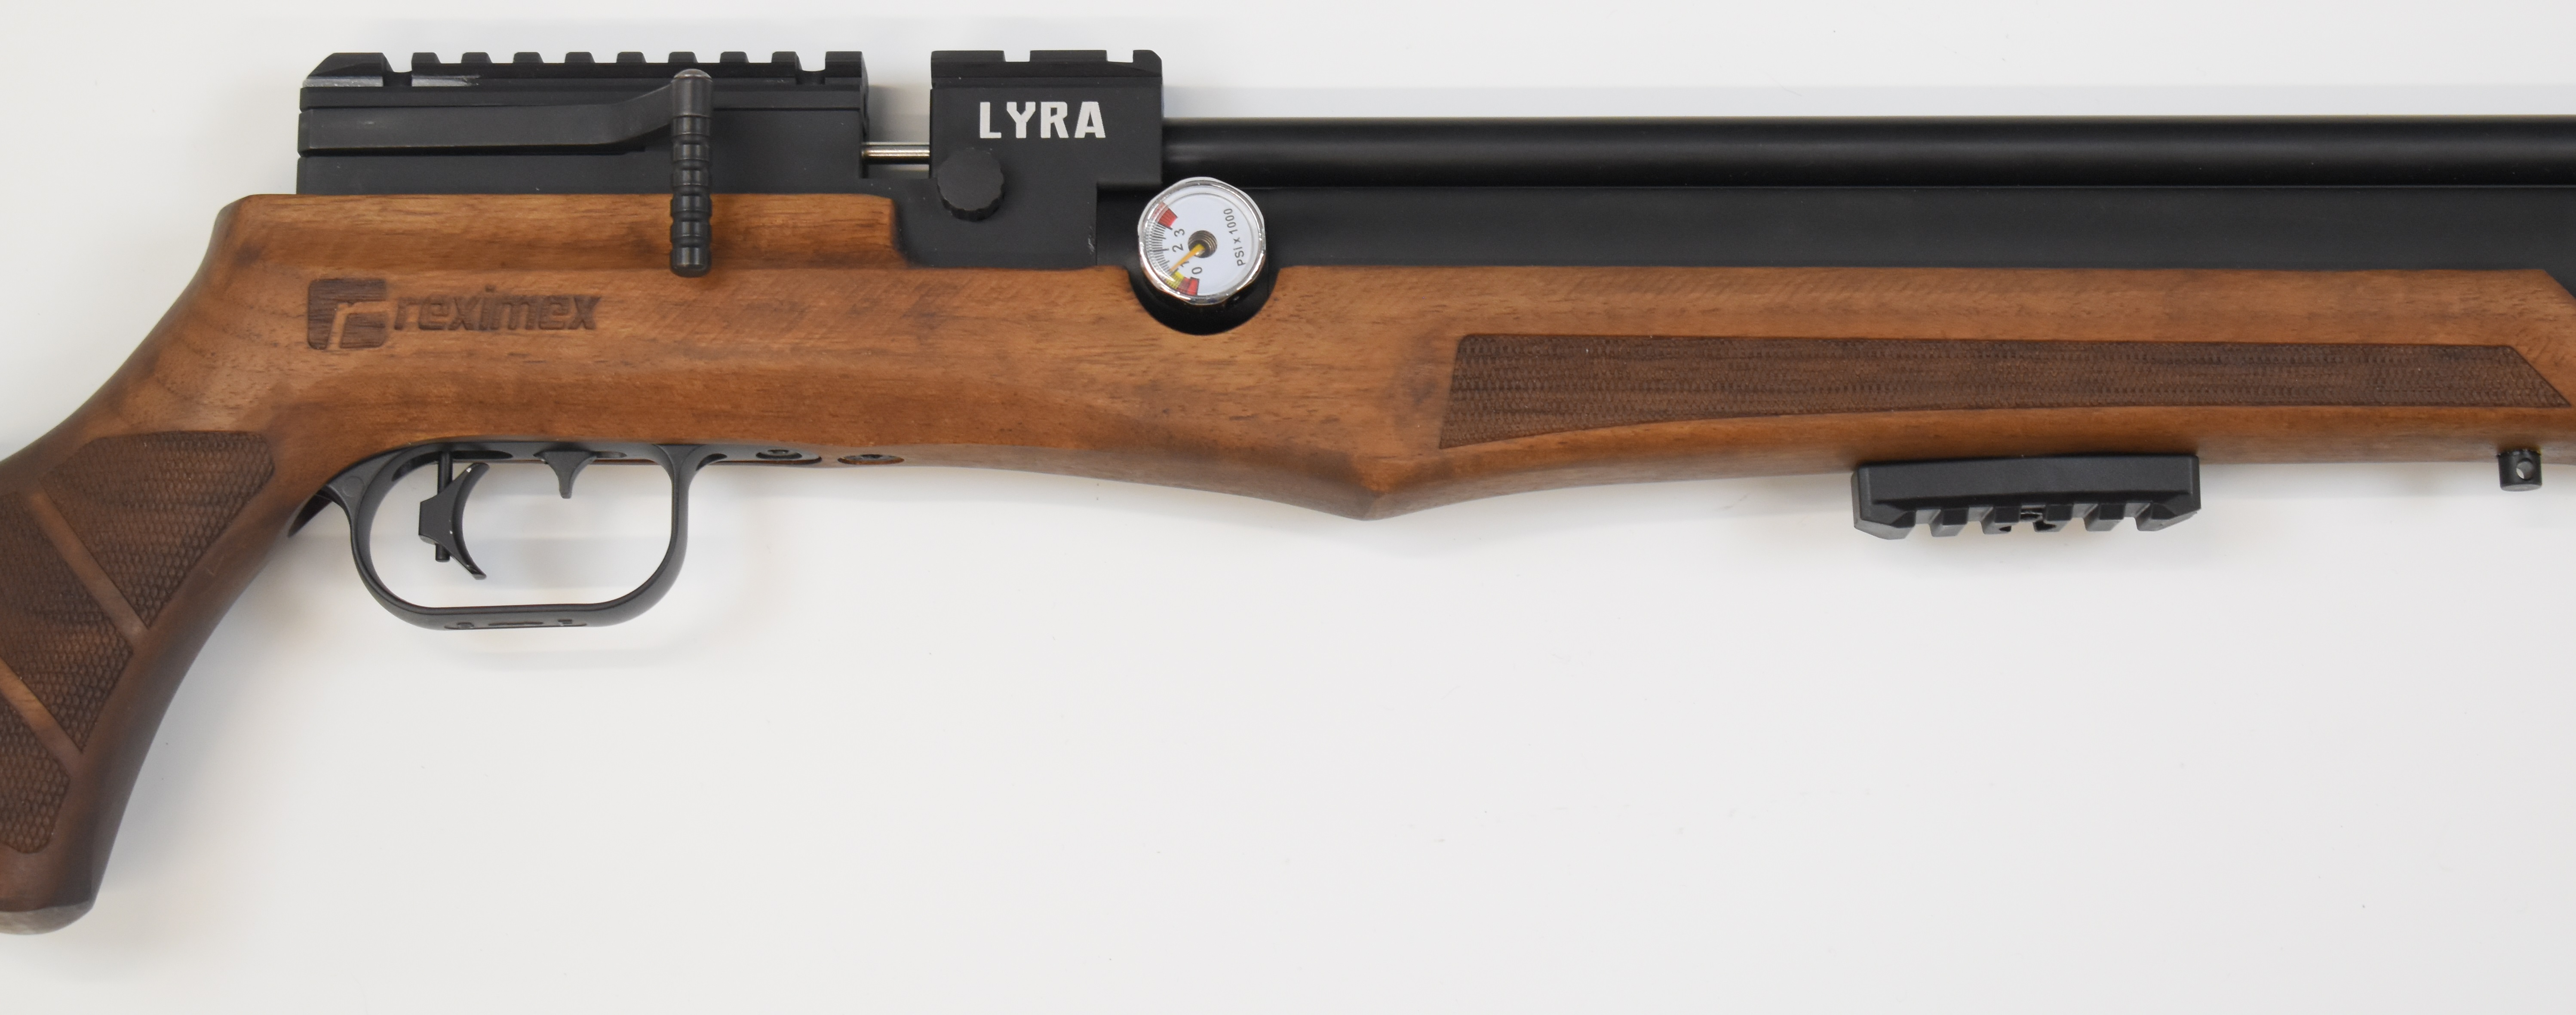 Reximex LYRA .22 PCP air rifle with chequered semi-pistol grip, adjustable trigger, 12-shot magazine - Image 4 of 12